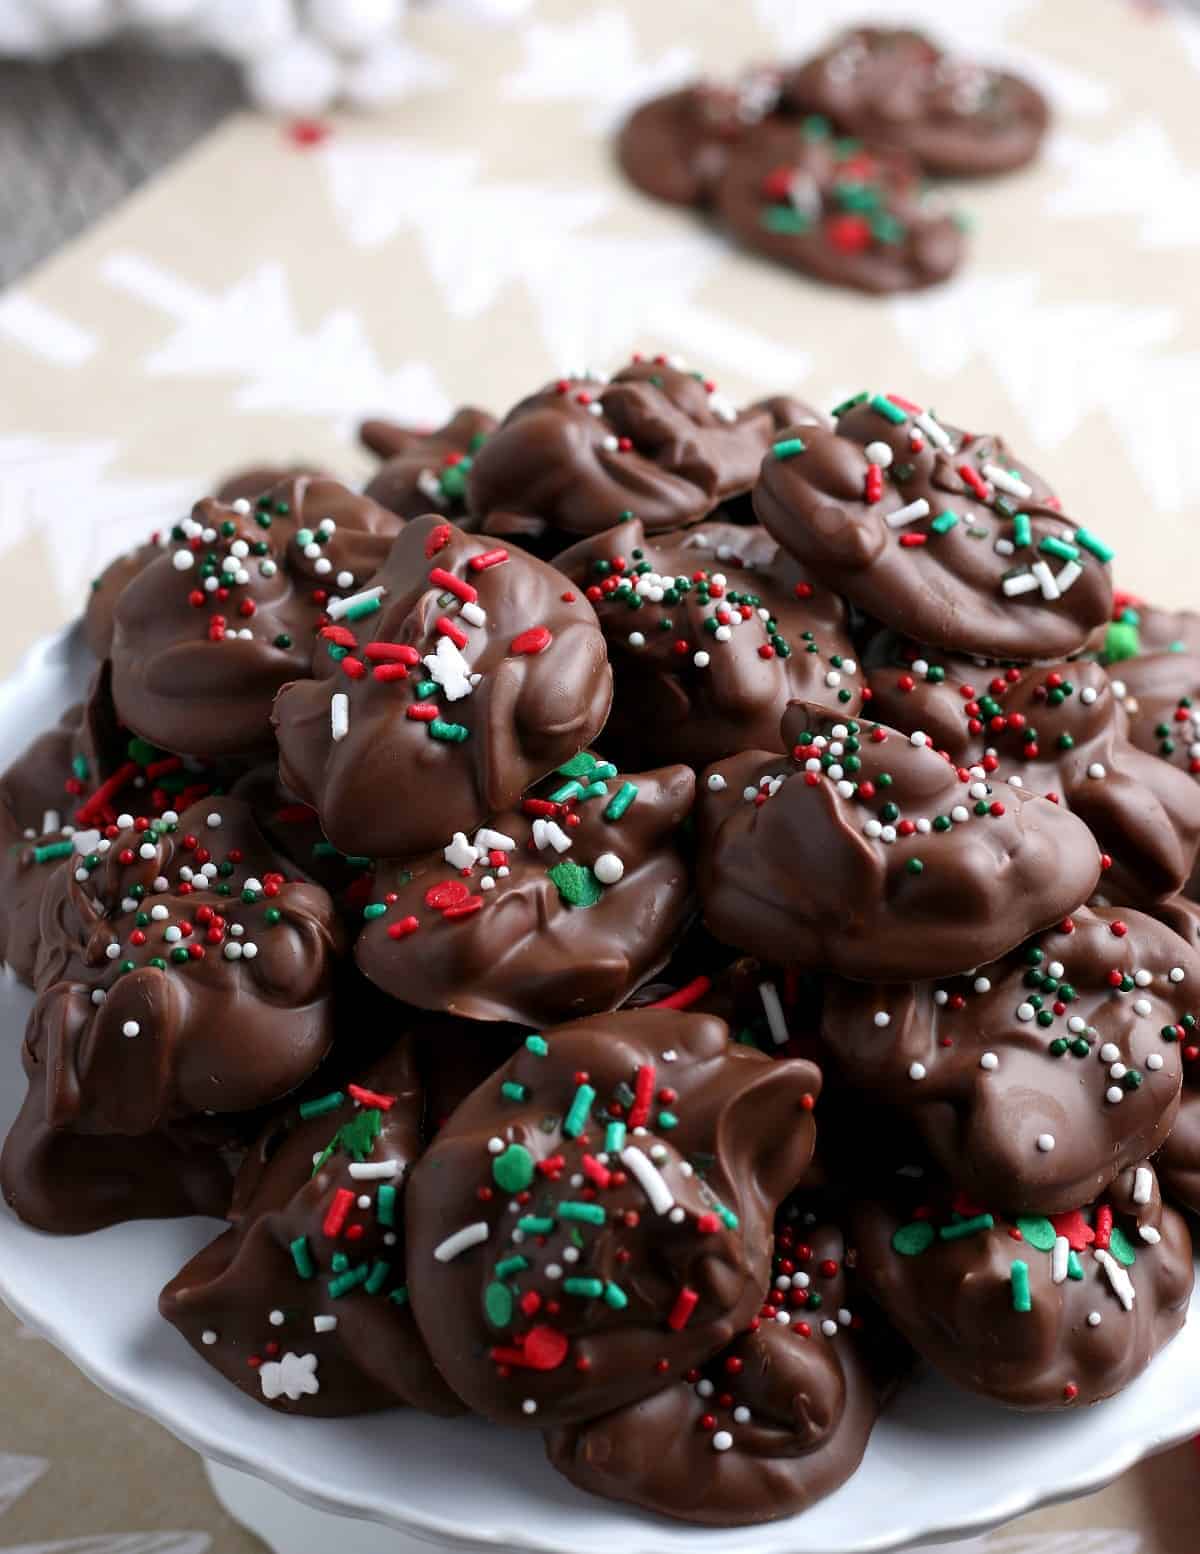 Huge pile of chocolate candies sprinkled with red, white and green sprinkles.